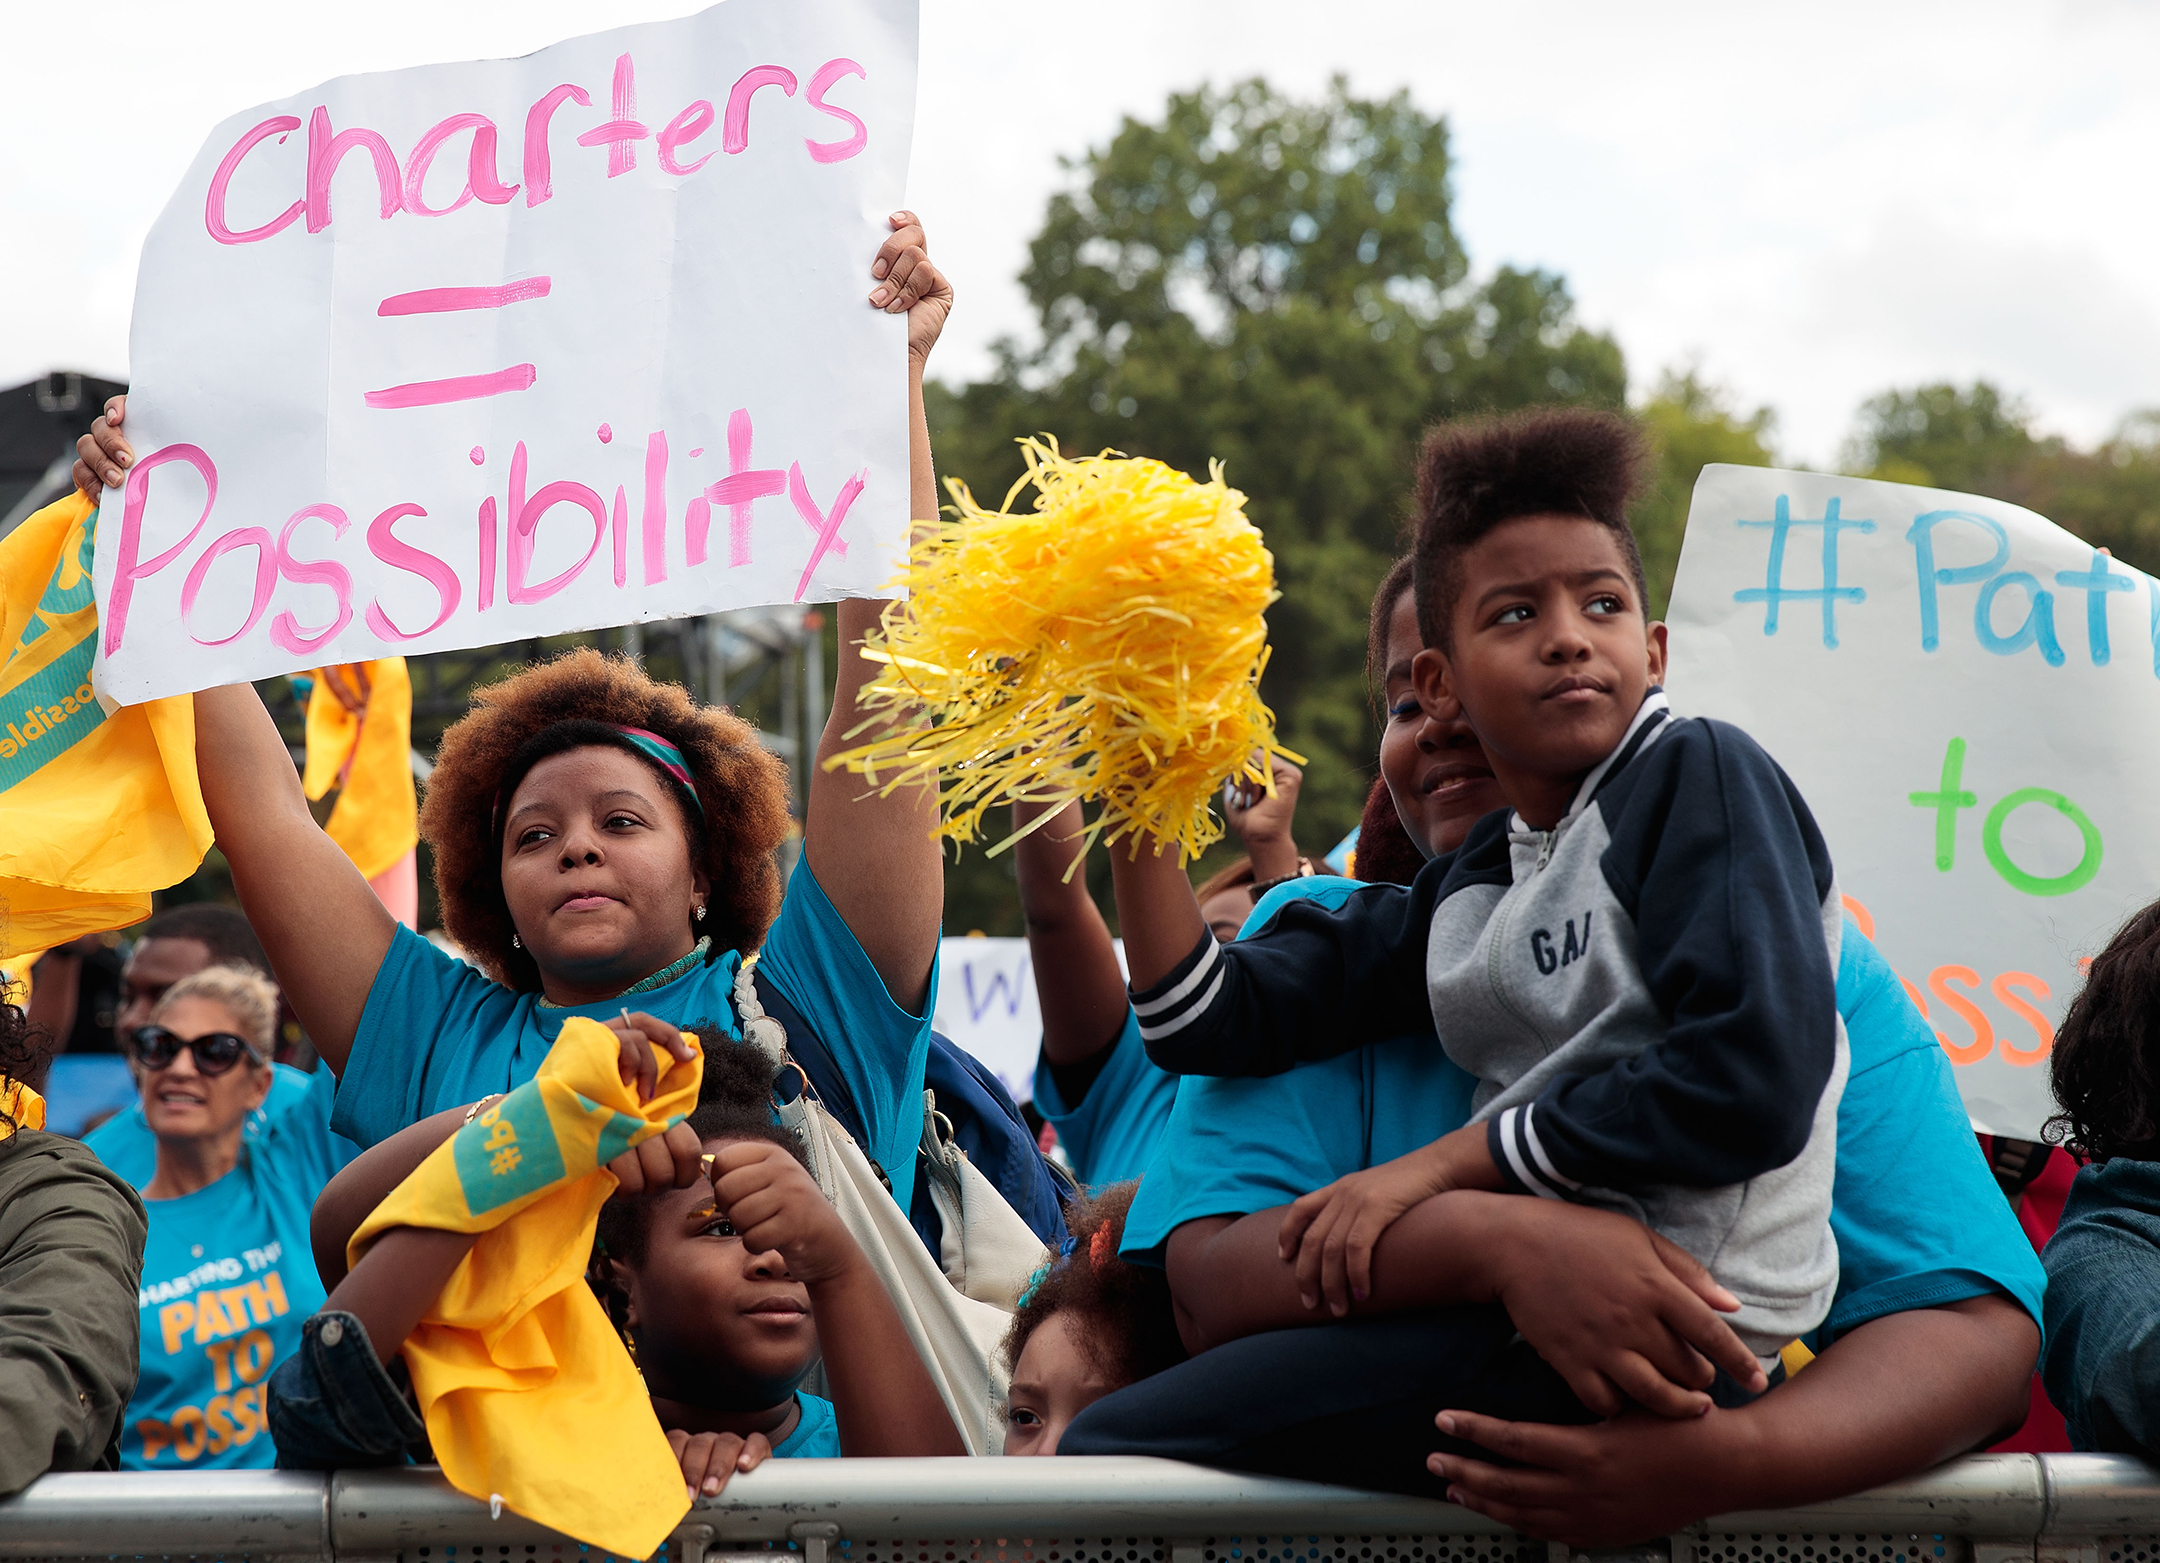 Family protesting school inequality by holding up signs that read charters = possibility